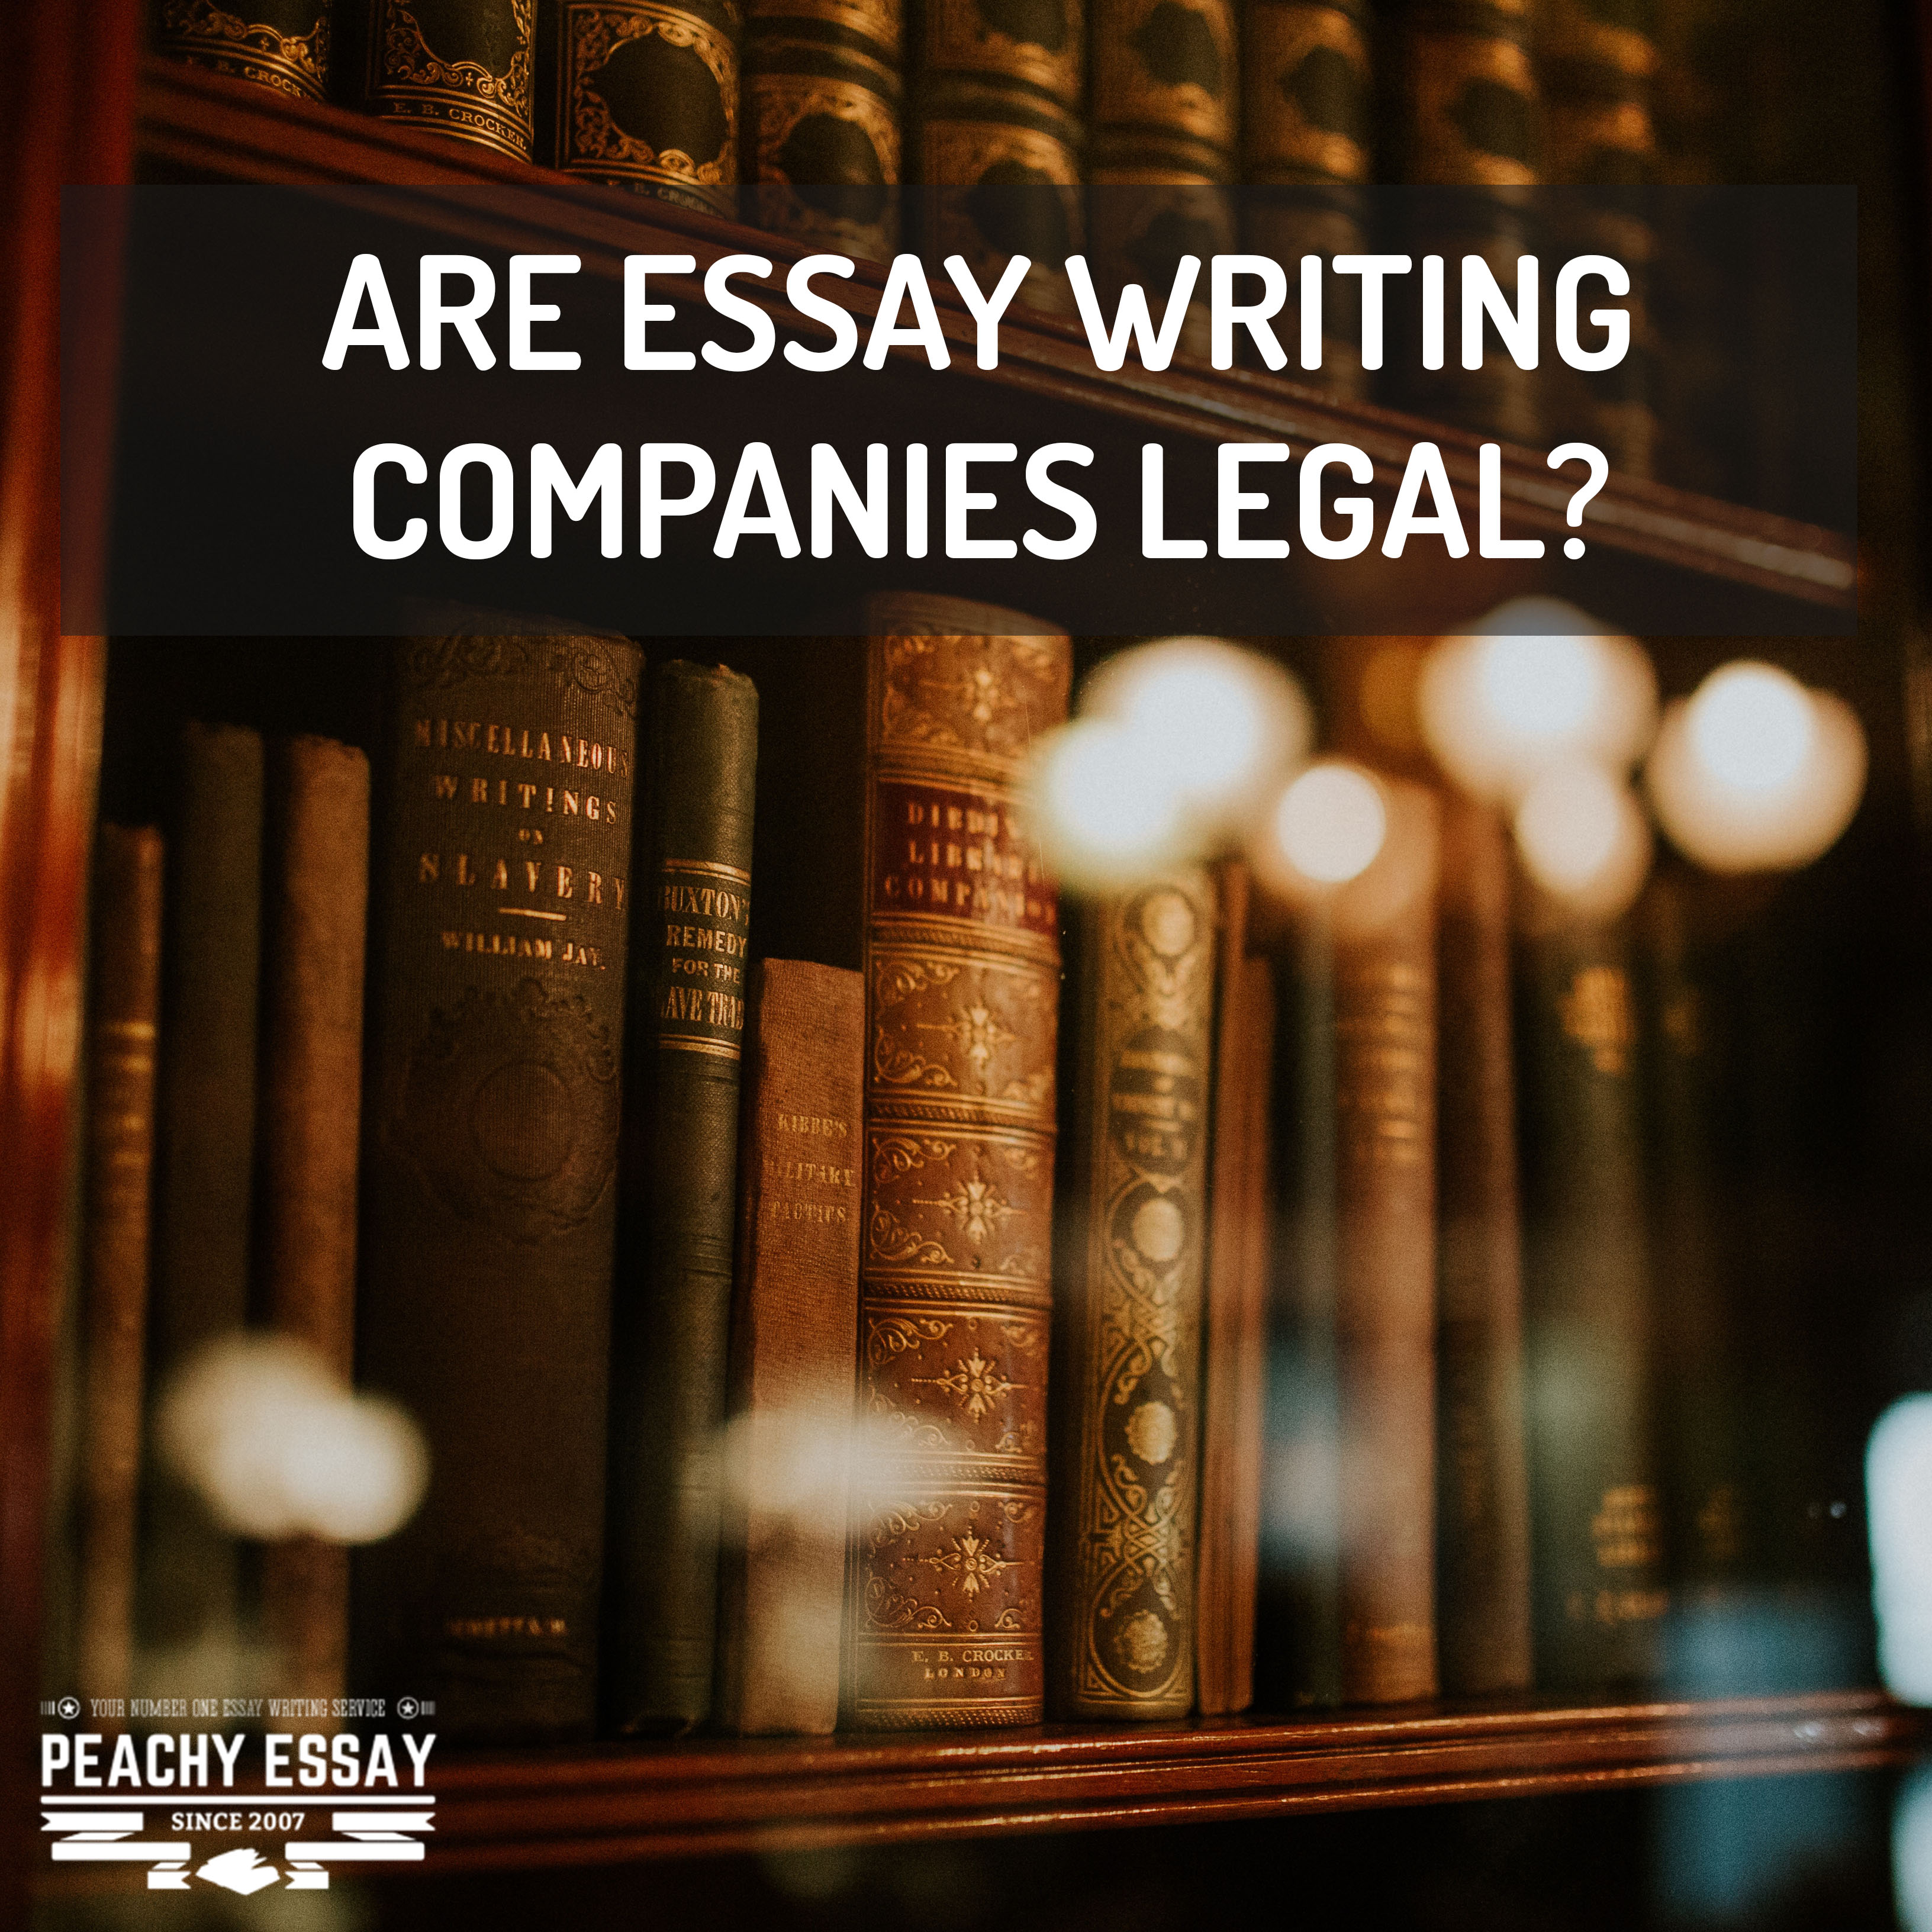 Are essay writing companies legal